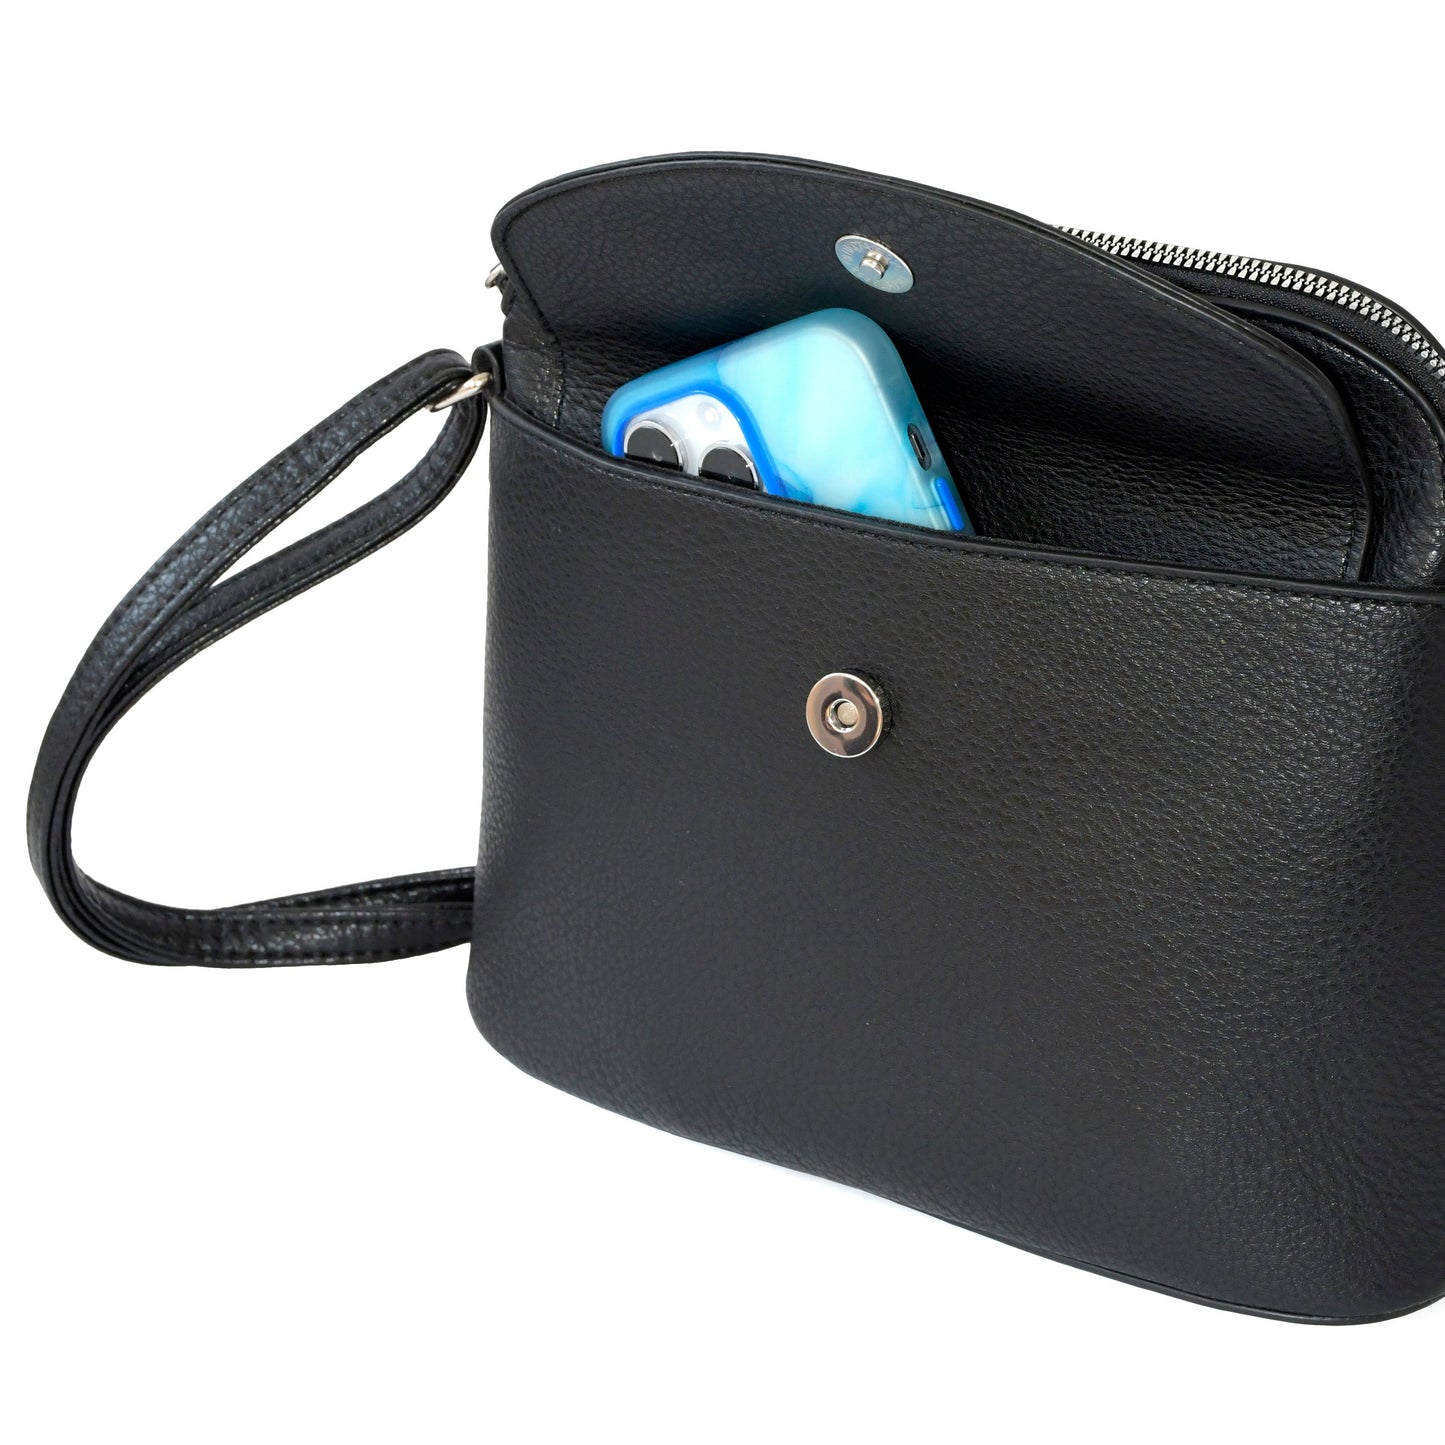 Ladies' Crossbody Bag with Front Flap